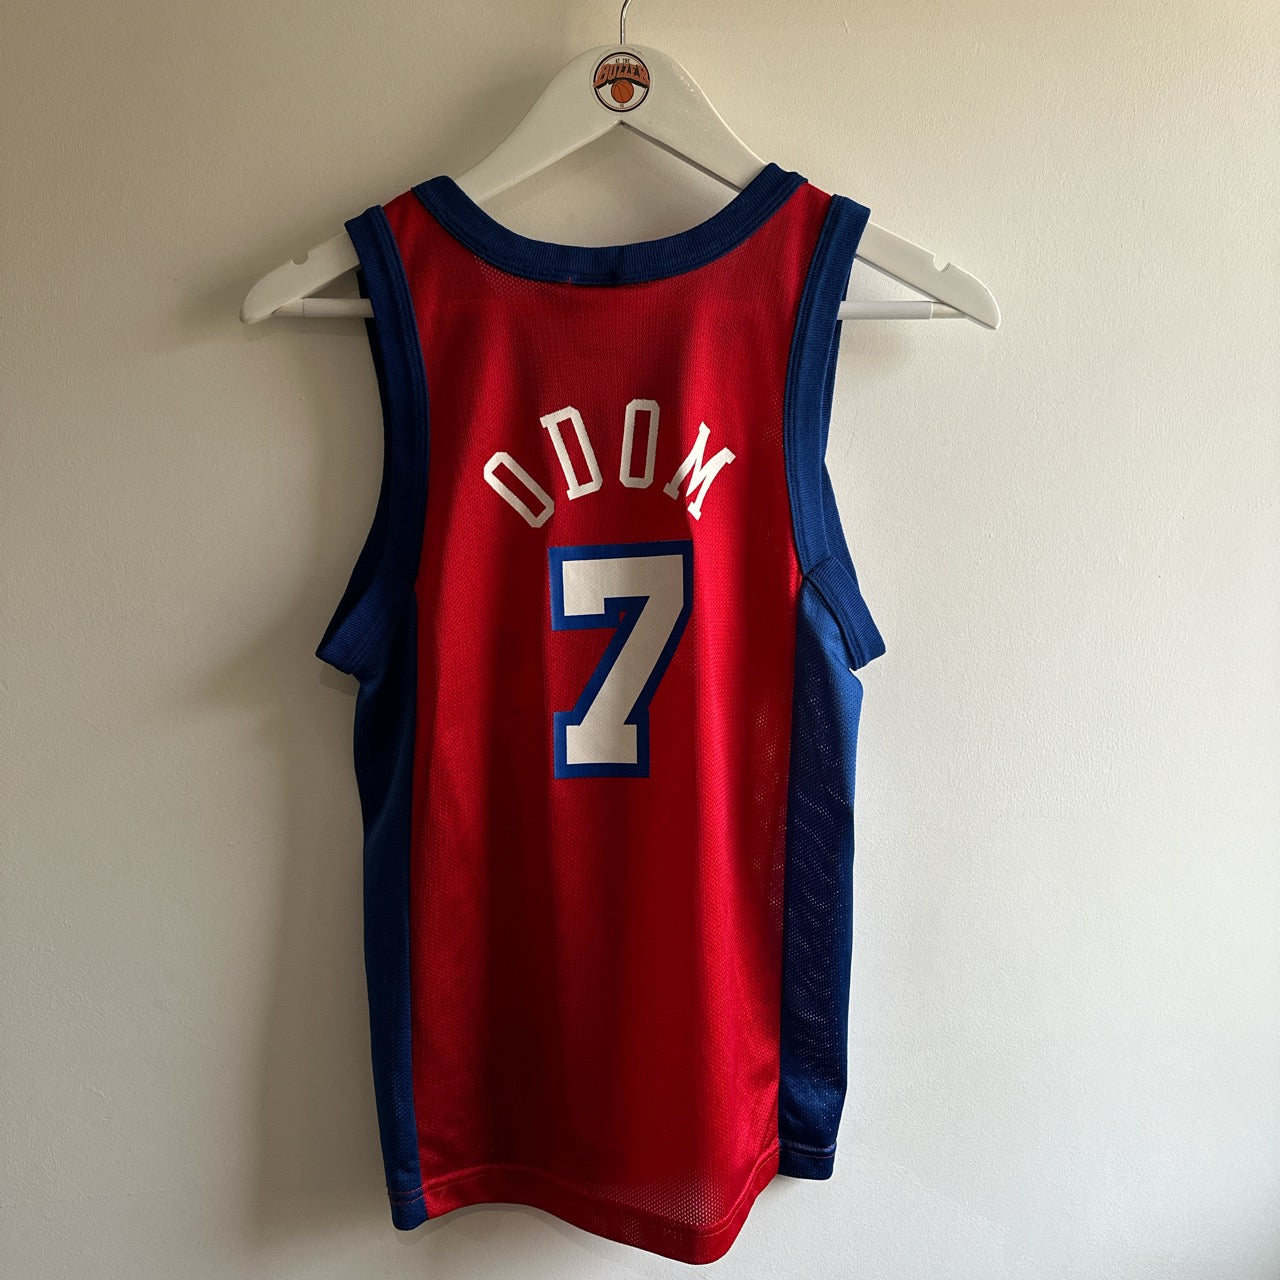 Los Angeles Clippers Lamar Odom jersey - Champion (Youth Medium)